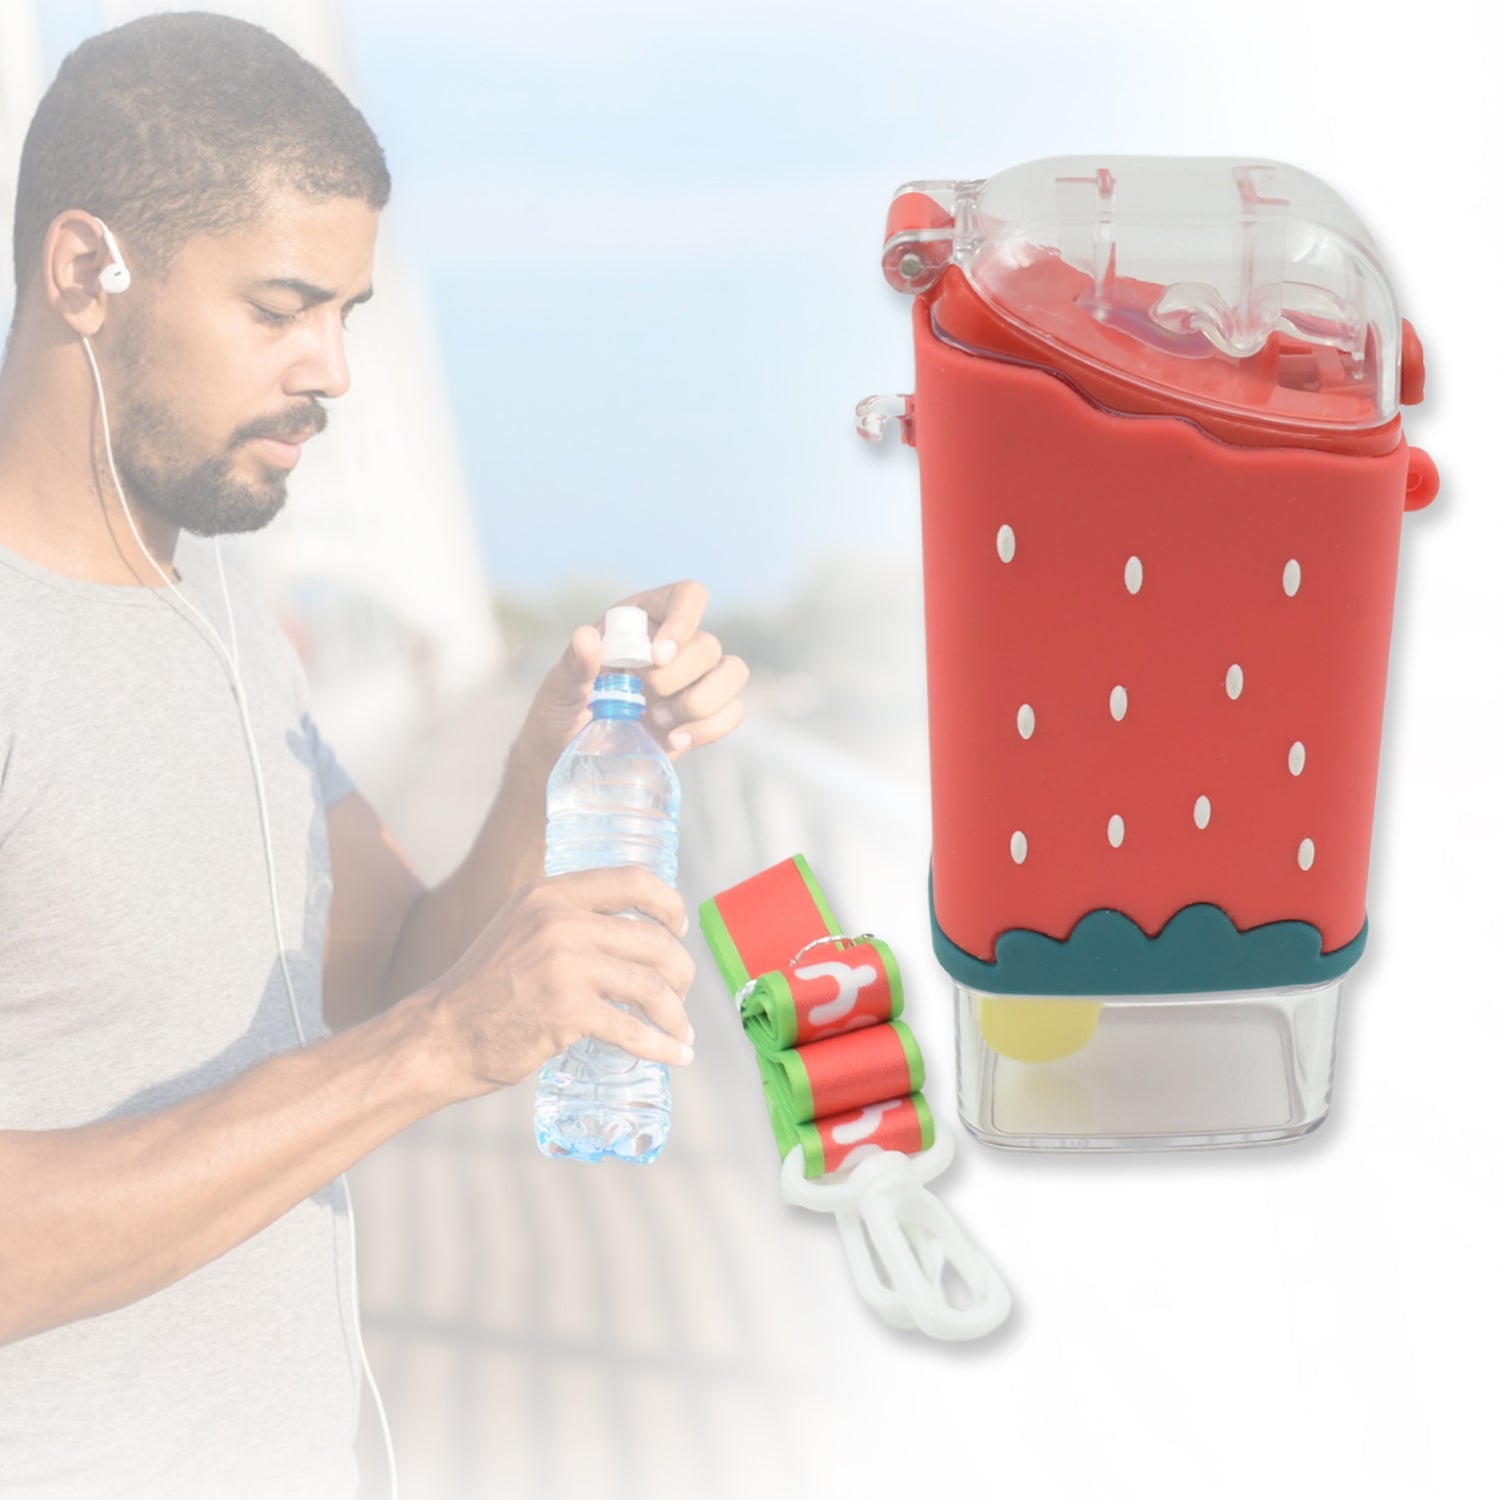 12555 Portable Cute Water Bottle for Kids, Unique Ice Cream Shape water cup, Popsicle Shaped Plastic Kettle with Straw, Adjustable Shoulder Strap, BPA free, Leakproof (300 ML)